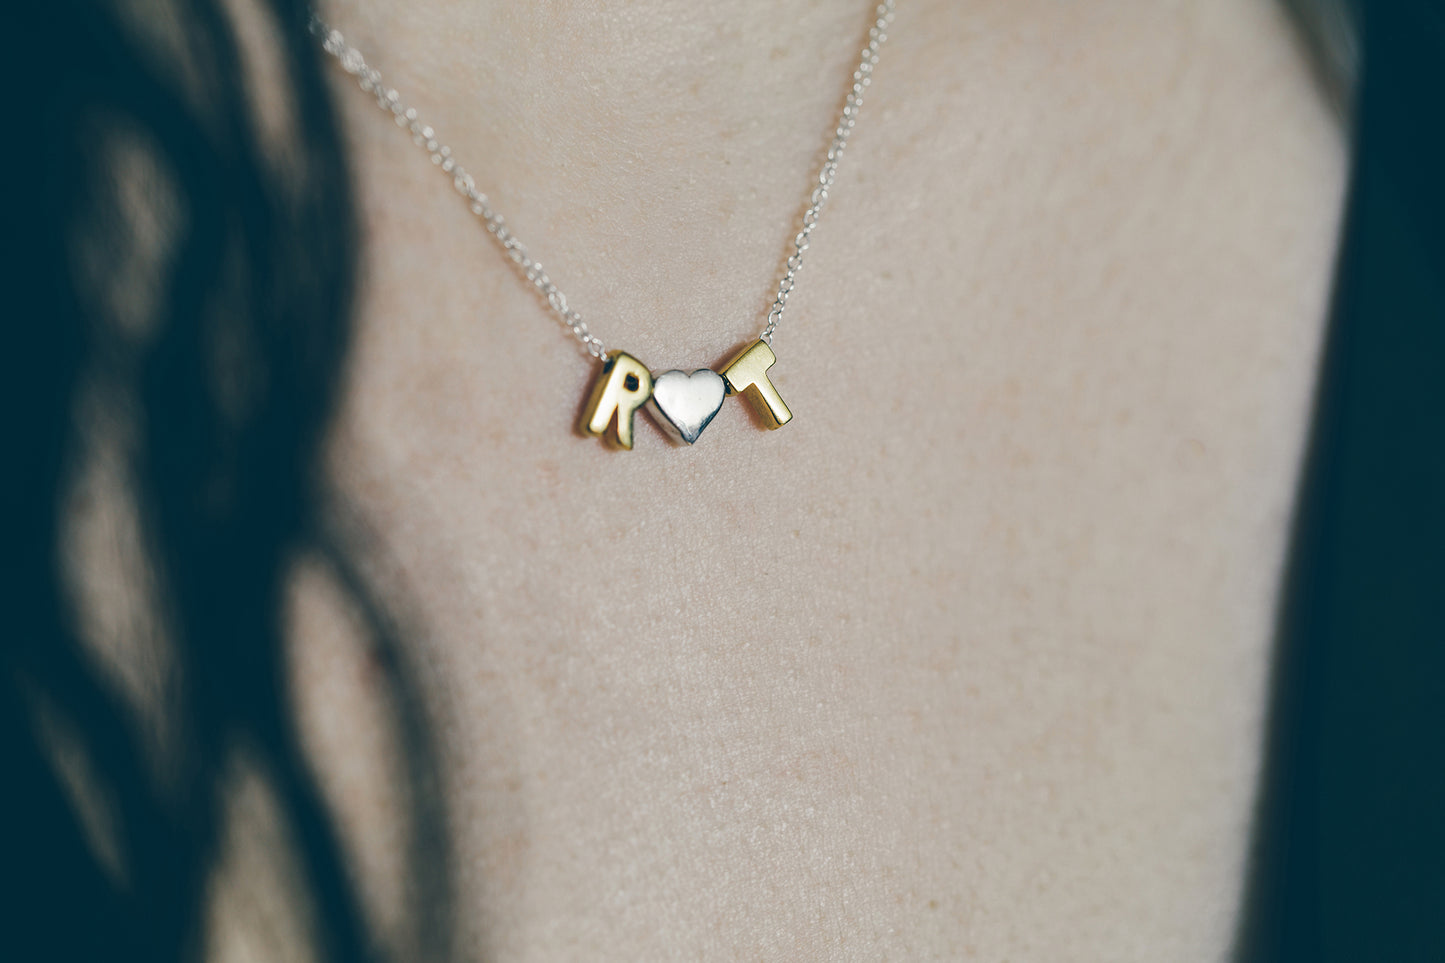 Personalized Necklaces for Women